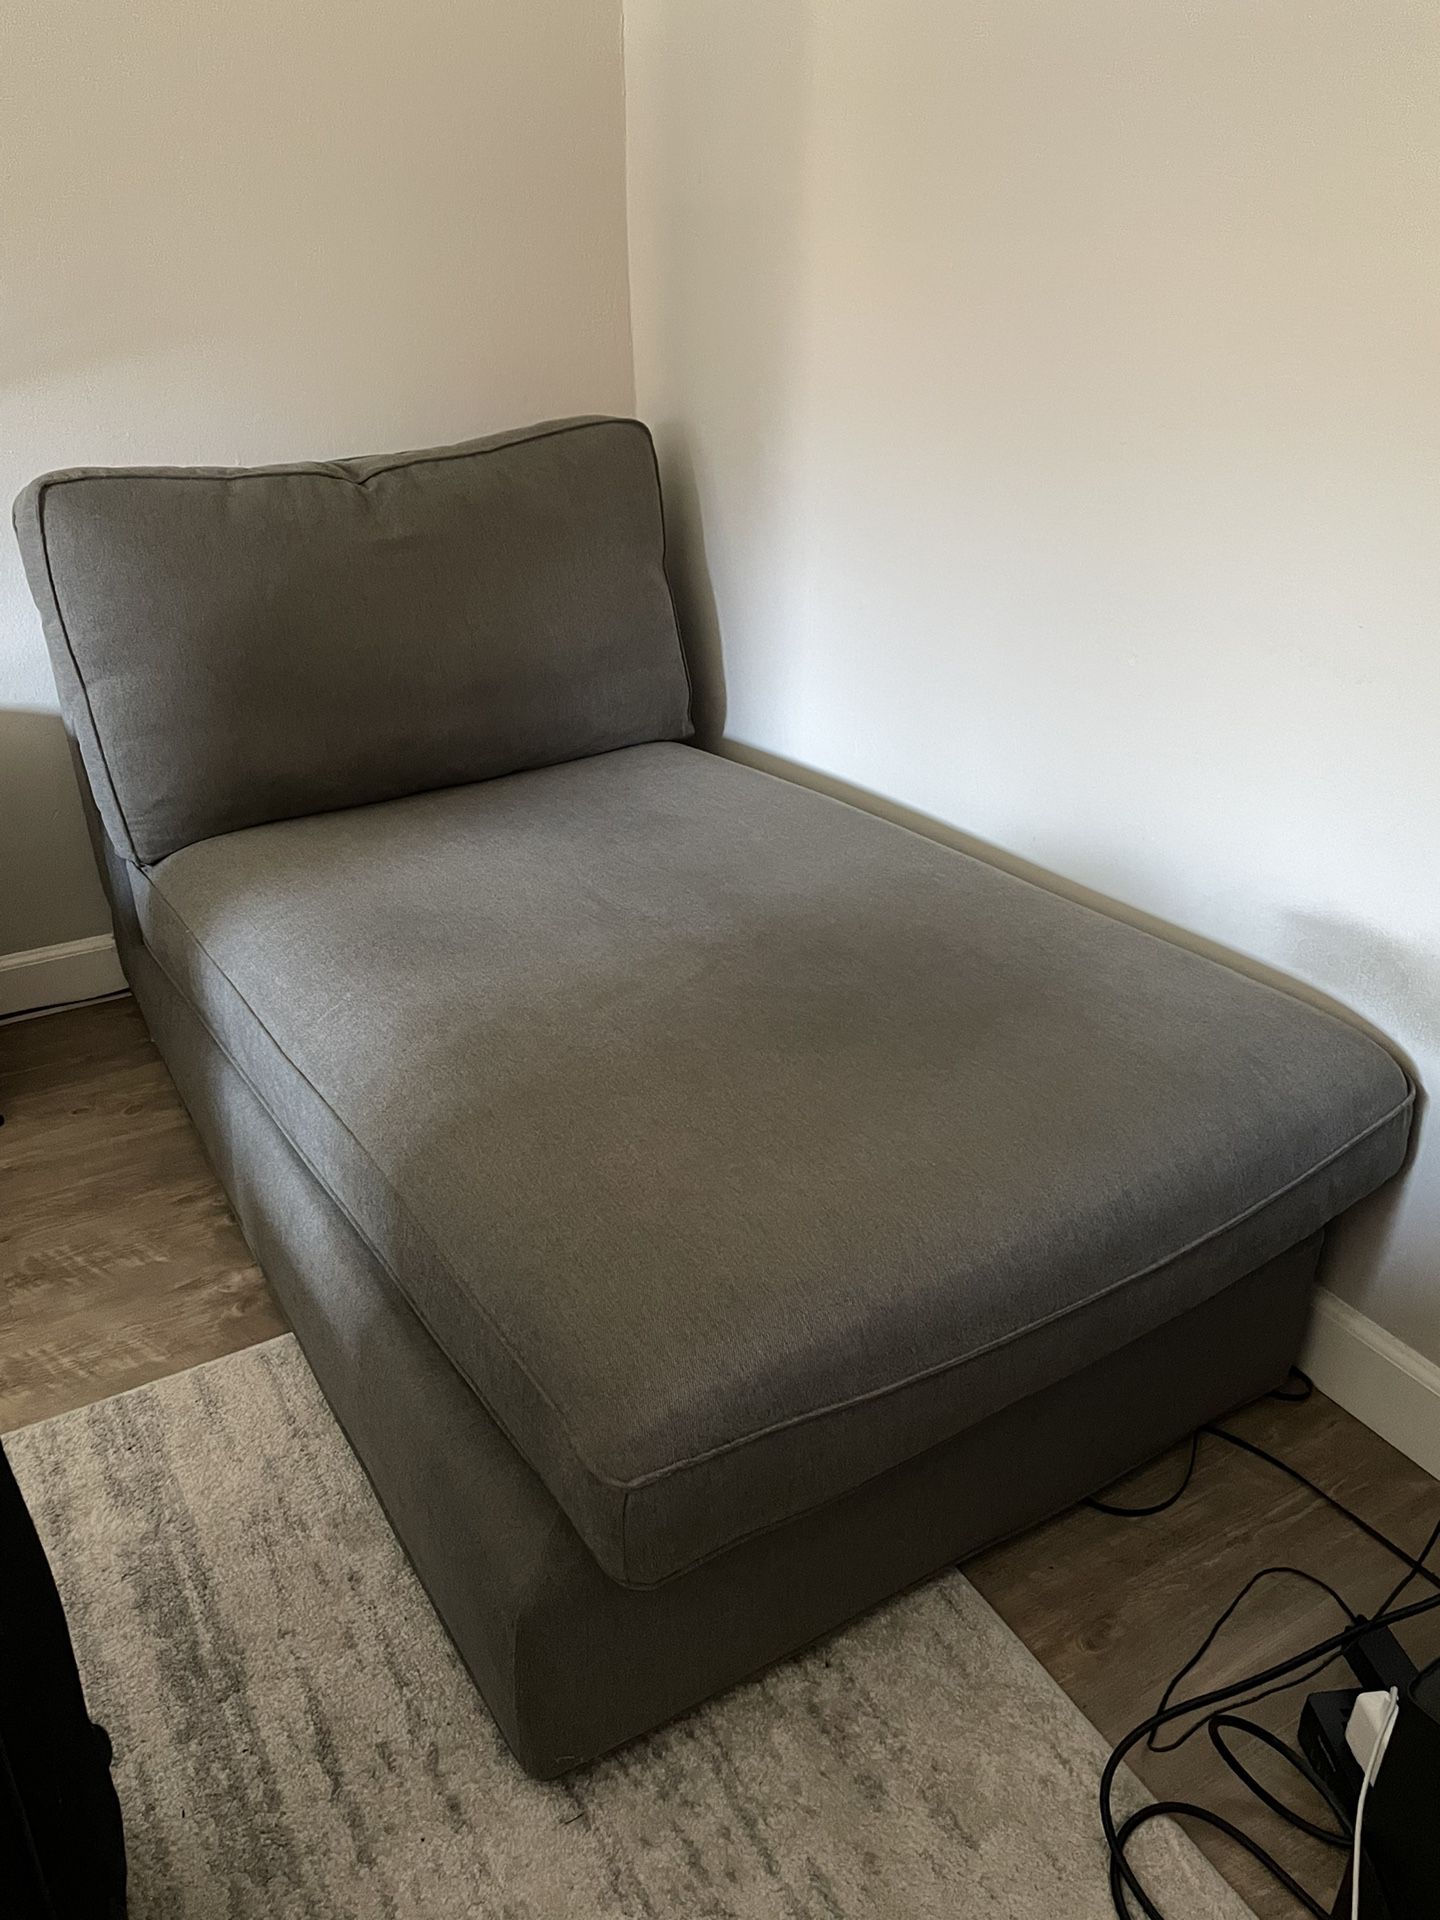 Gray Couch 65x36 ($40)